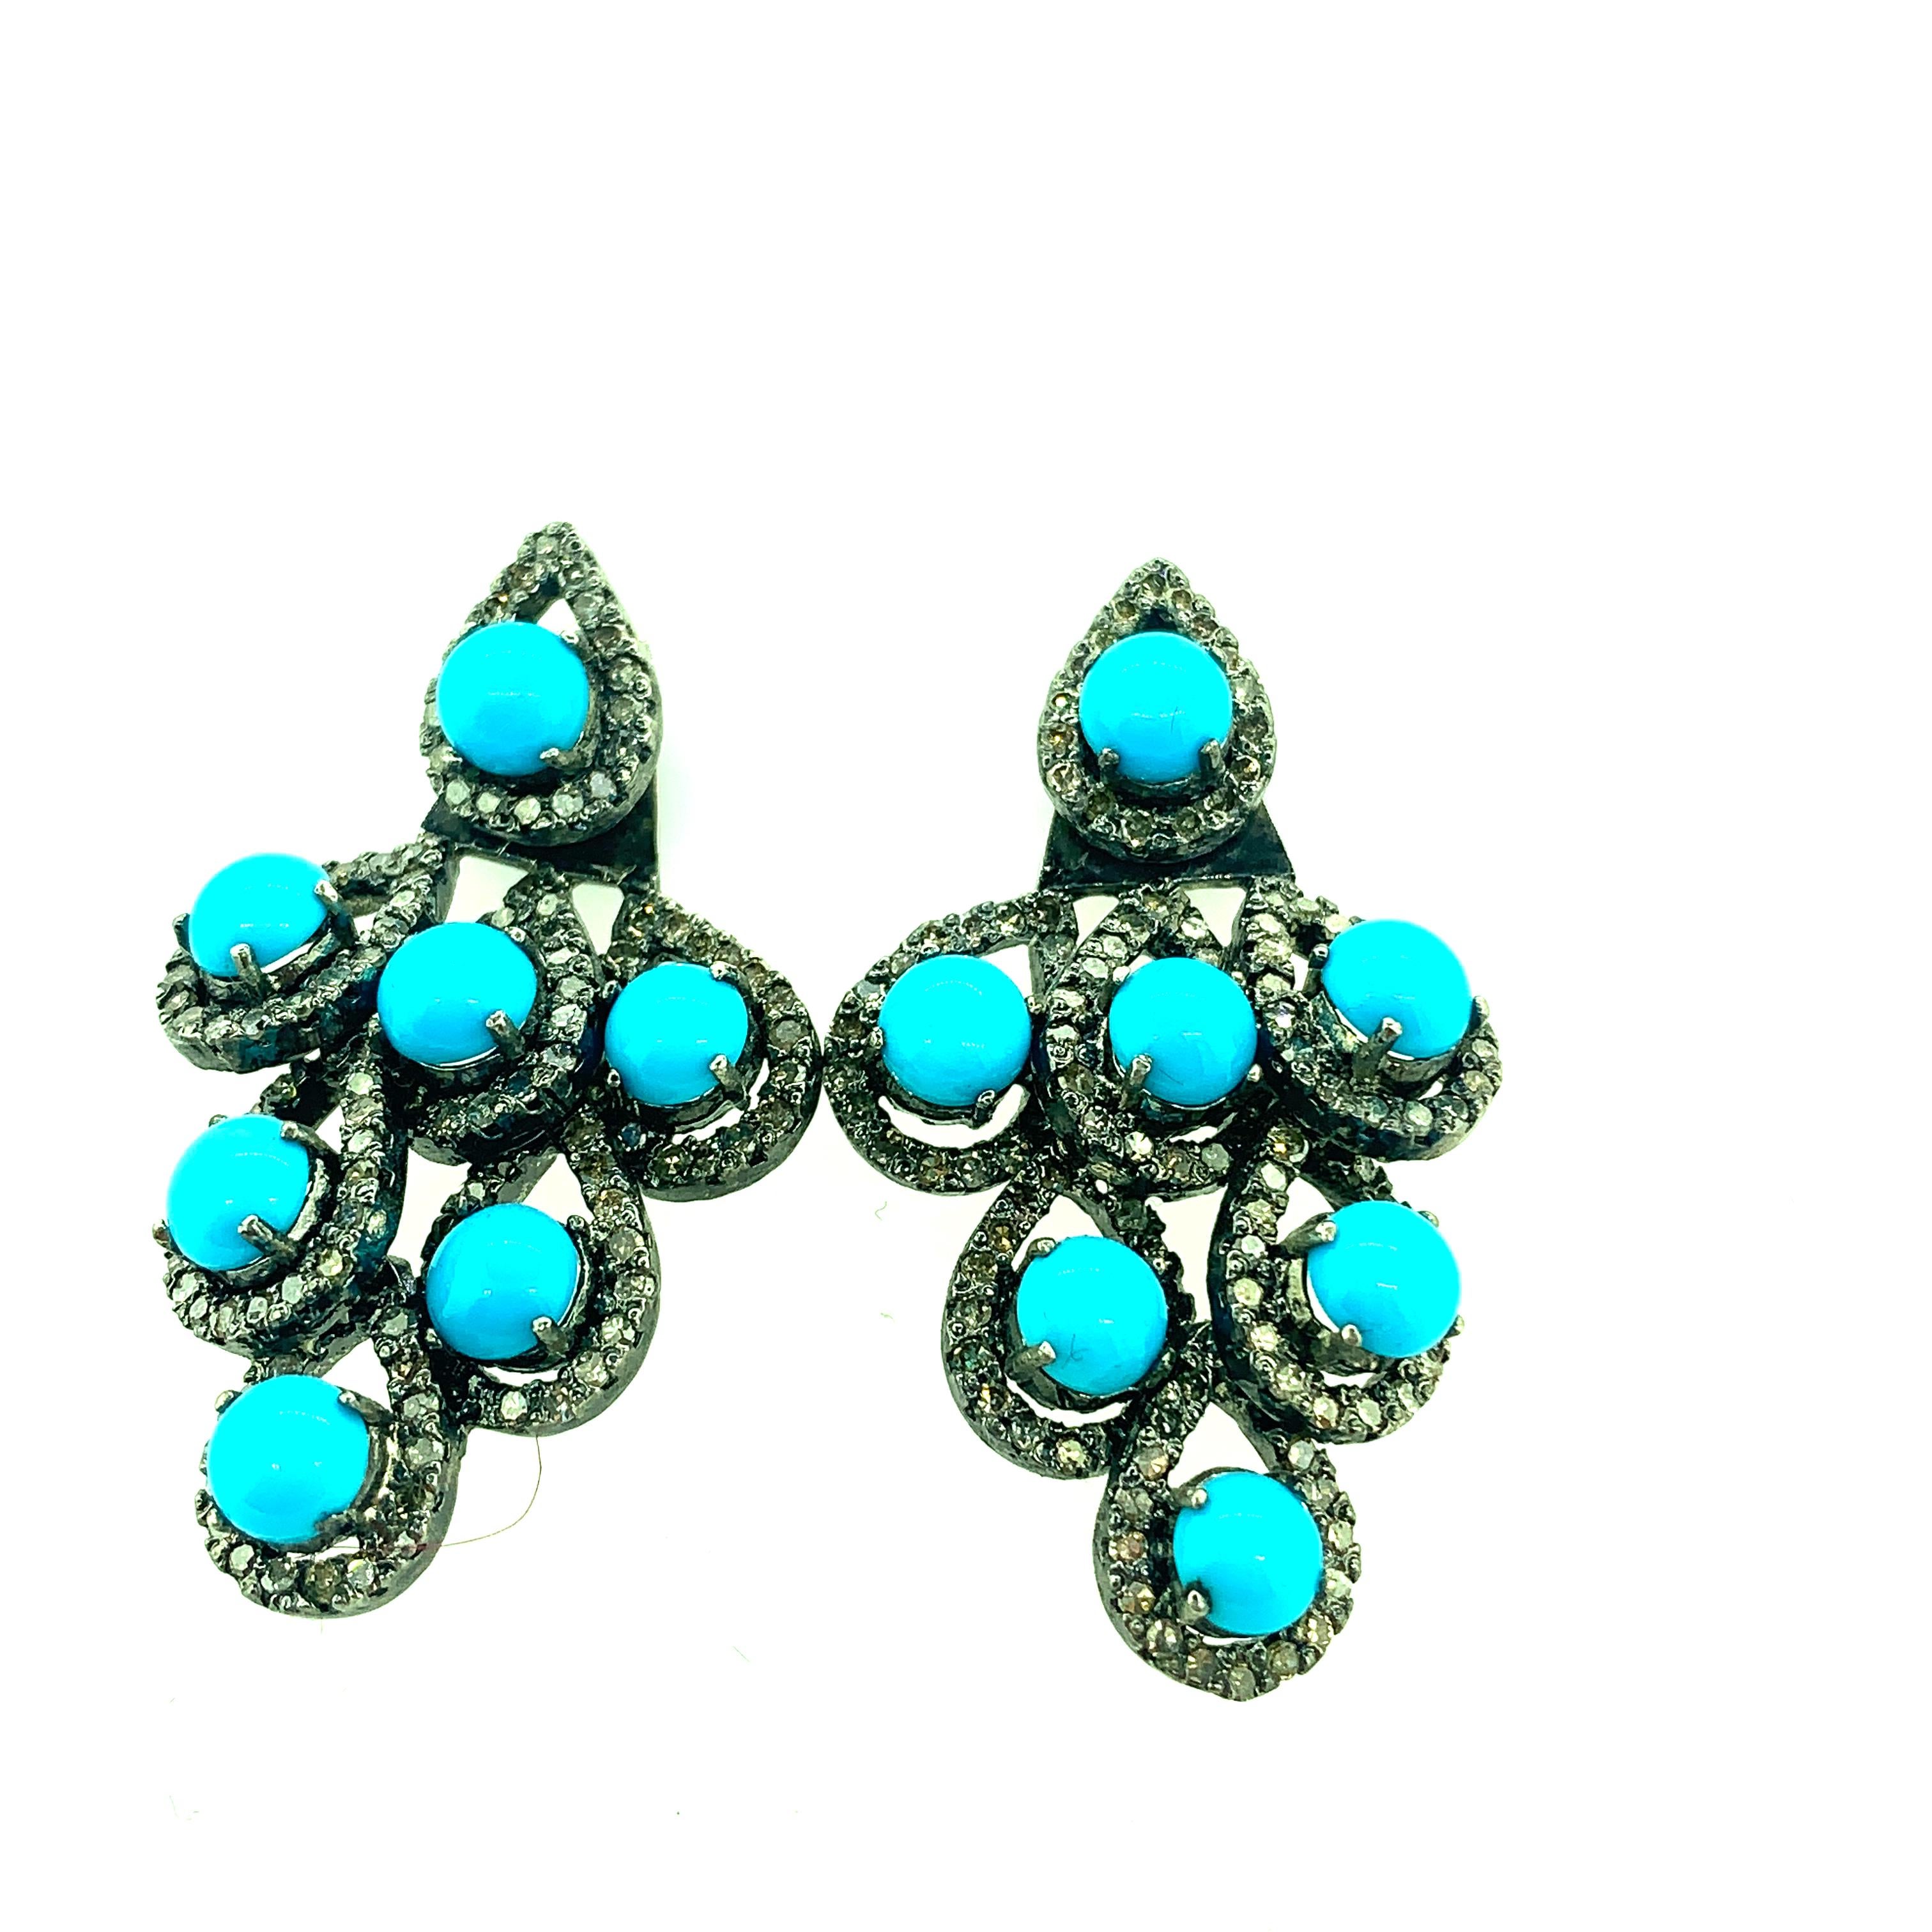 Round Cut 6.45 Carat Turquoise, Diamond Earring in Oxidized Sterling Silver, 14 Karat Gold For Sale